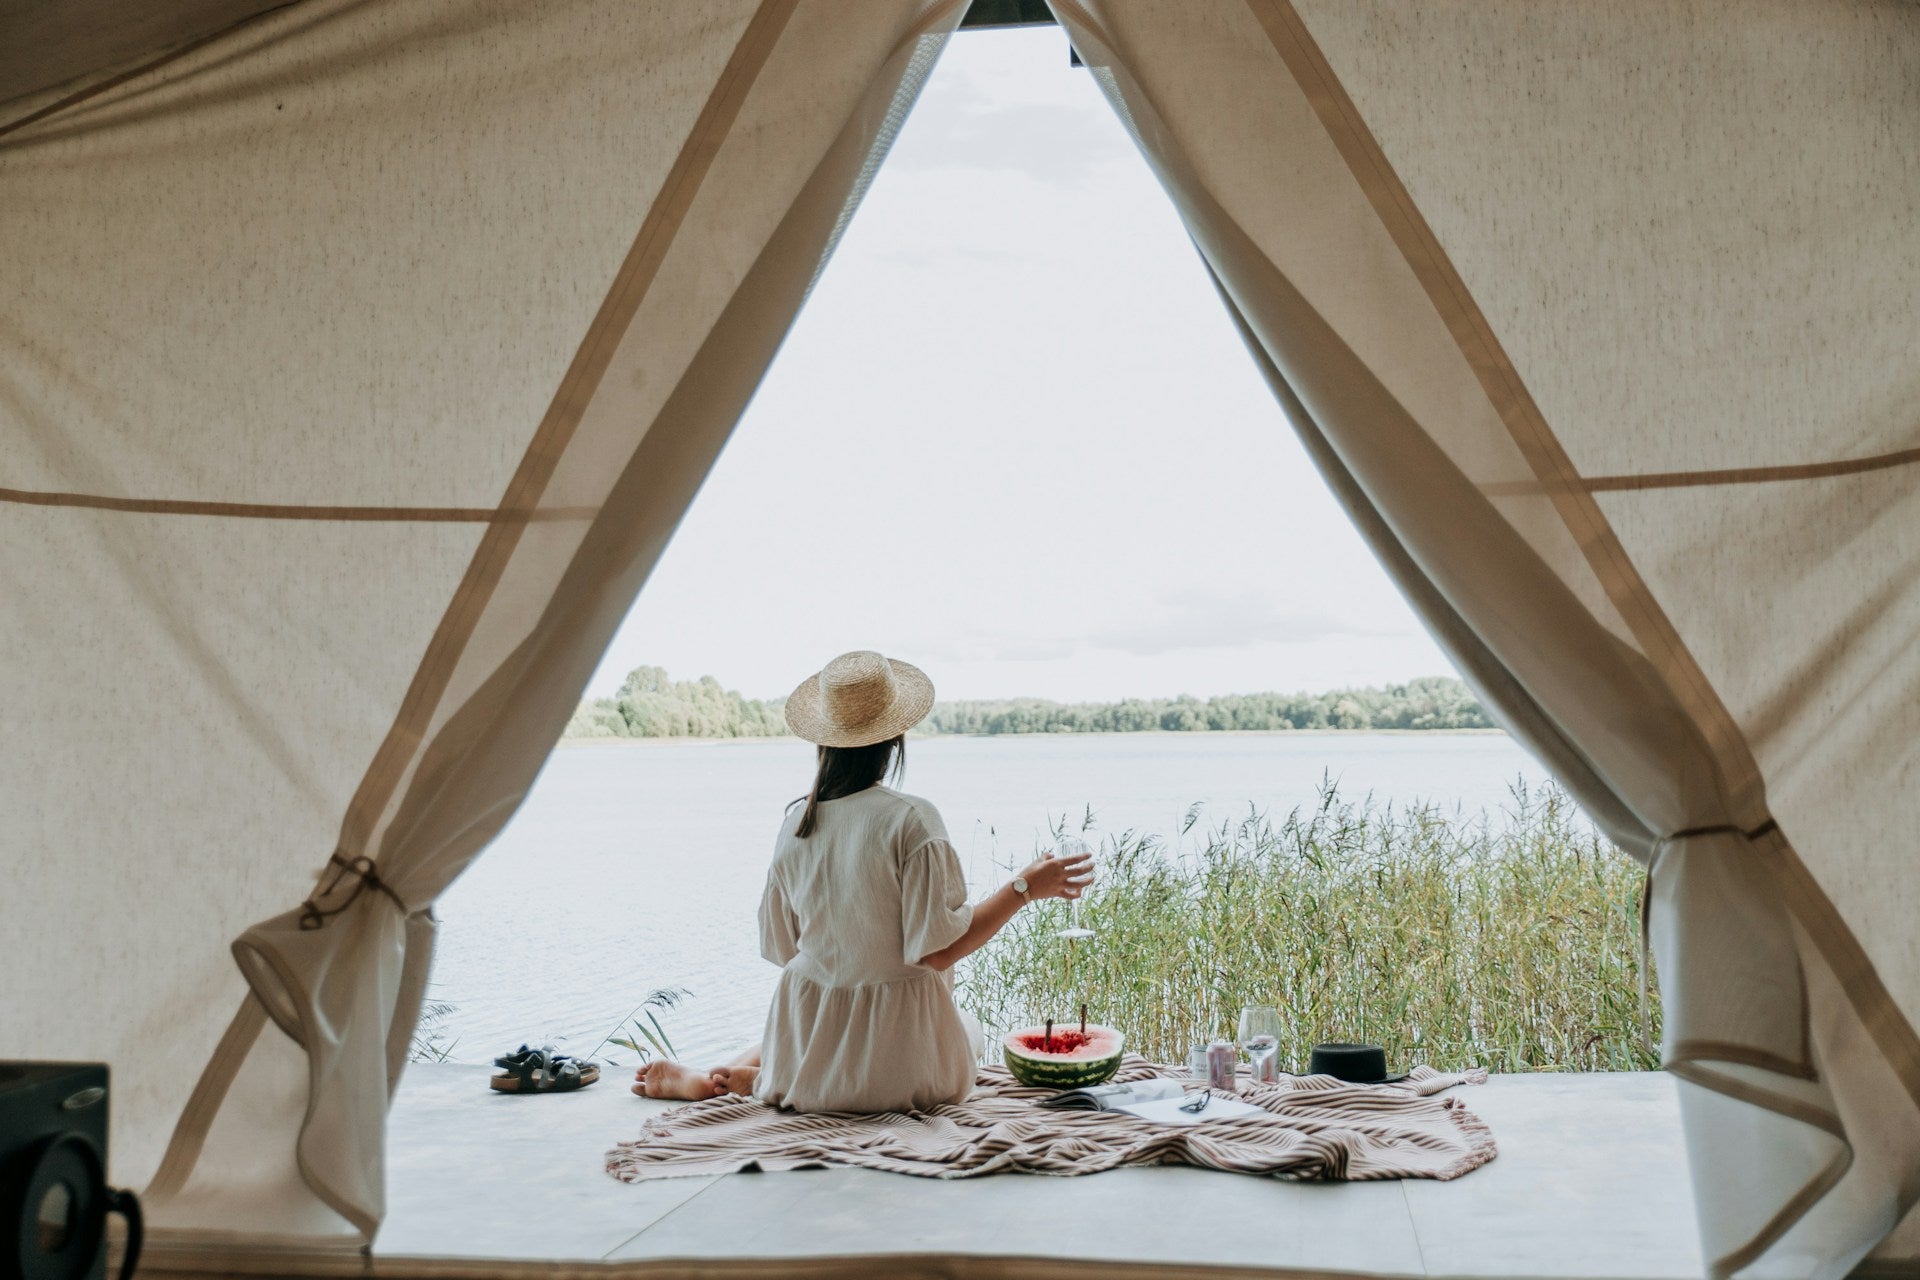 A photo taken from inside a glamping tent framing a woman wearing a white dress sitting on the porch having a delicious meal